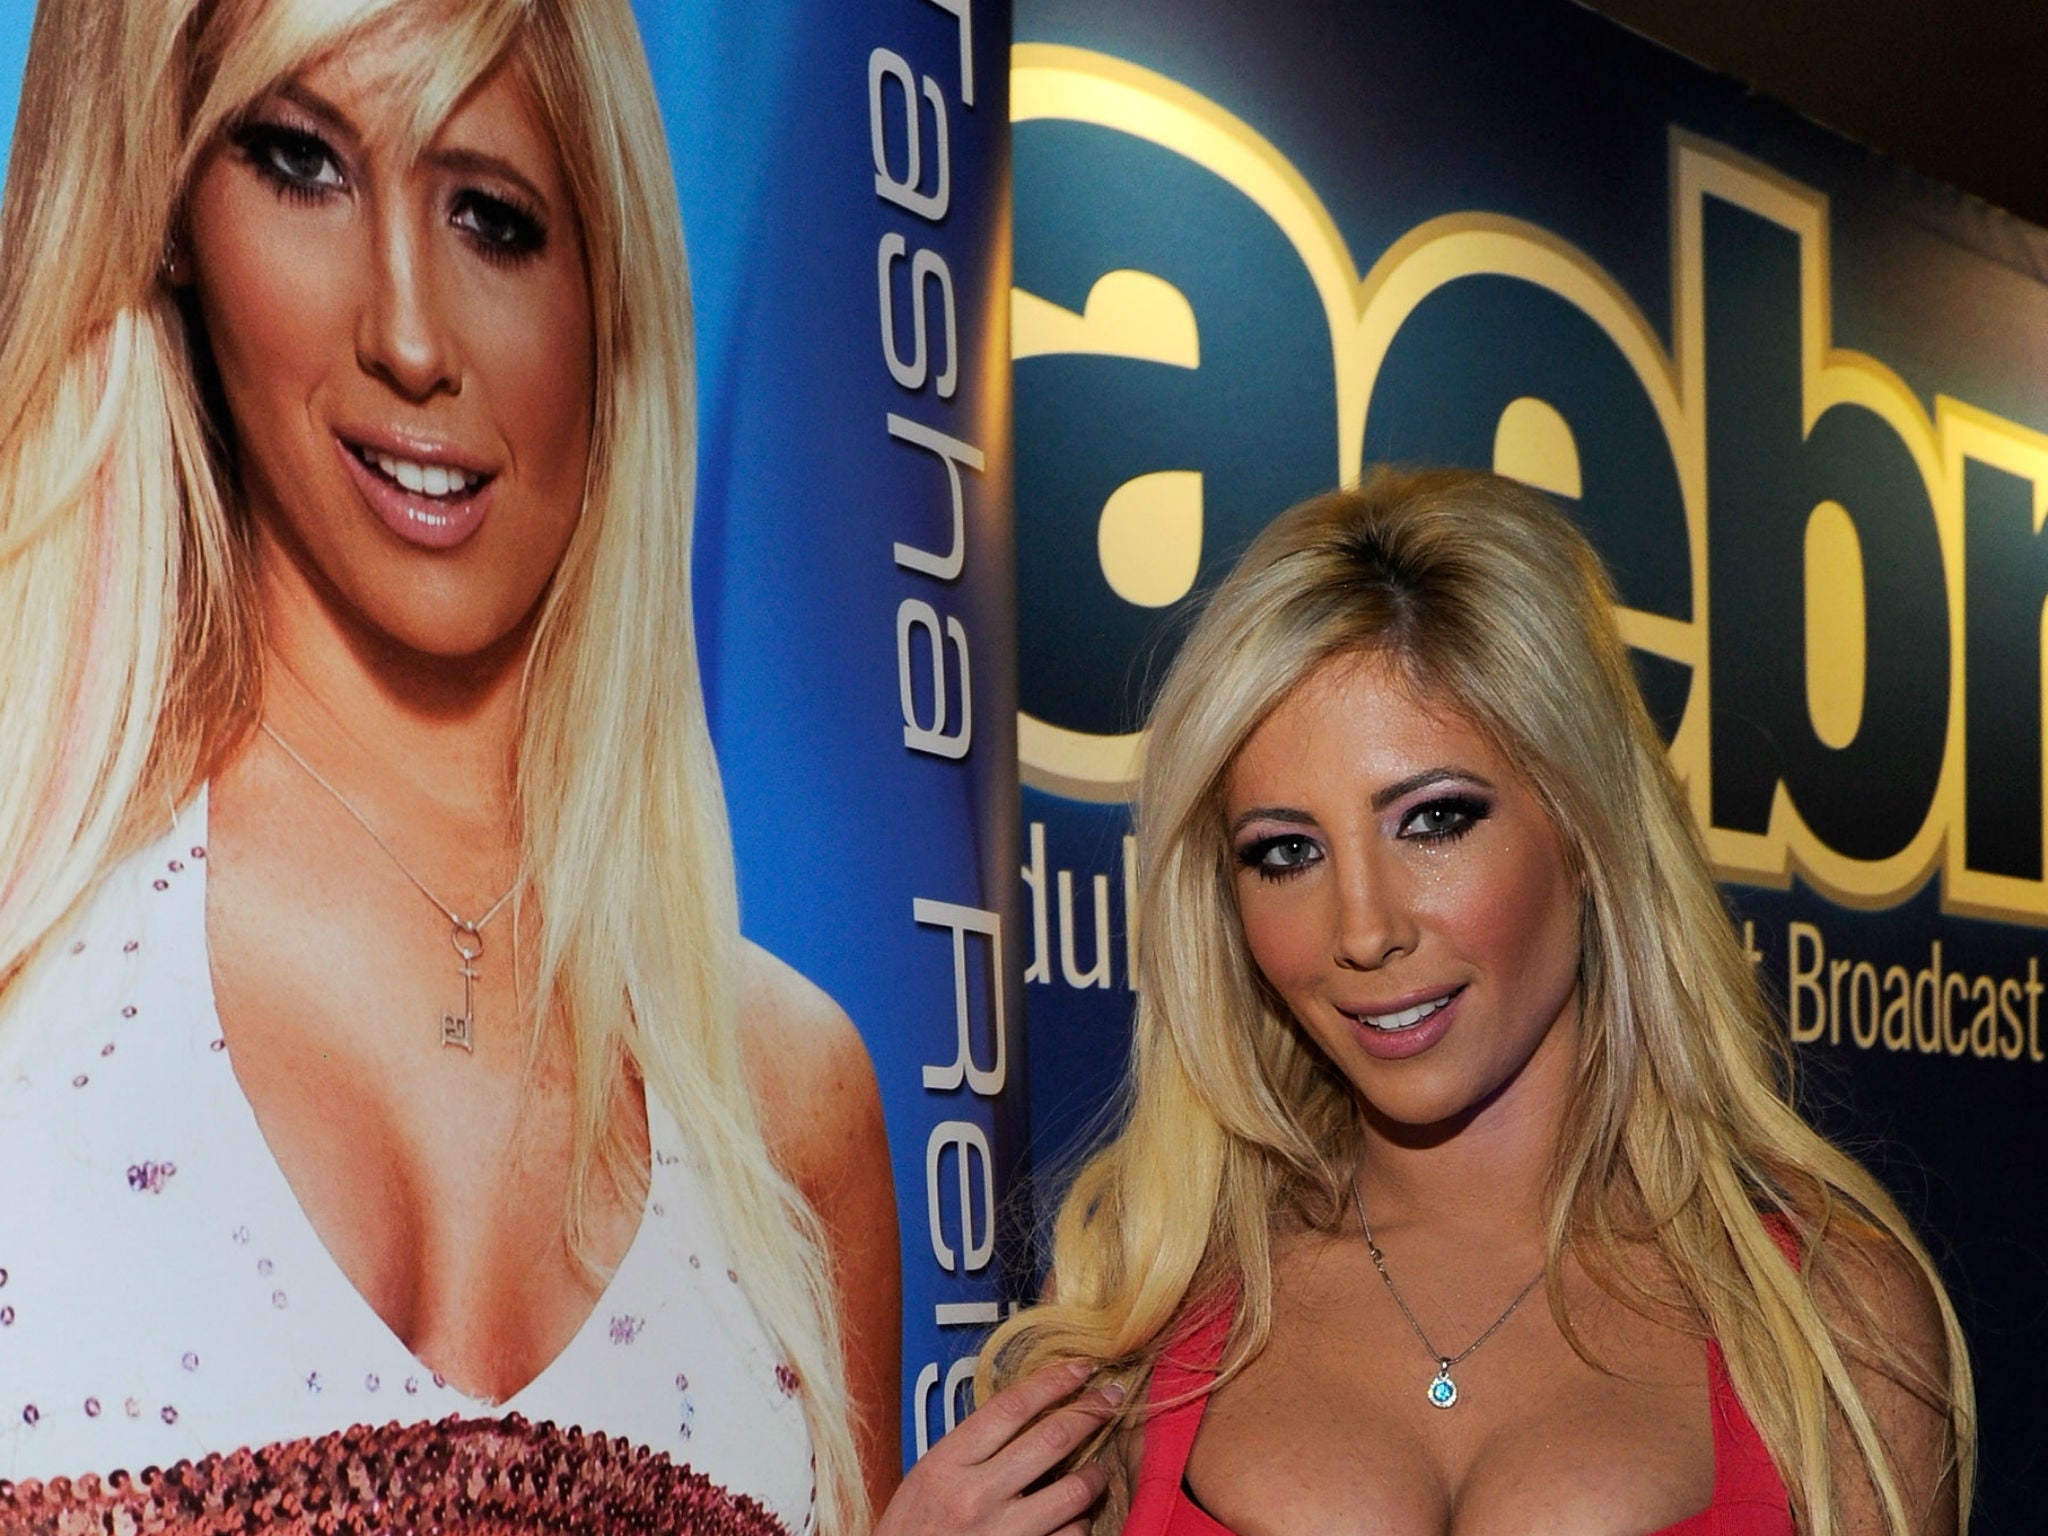 Tasha Reign is campaigning against Proposition 60